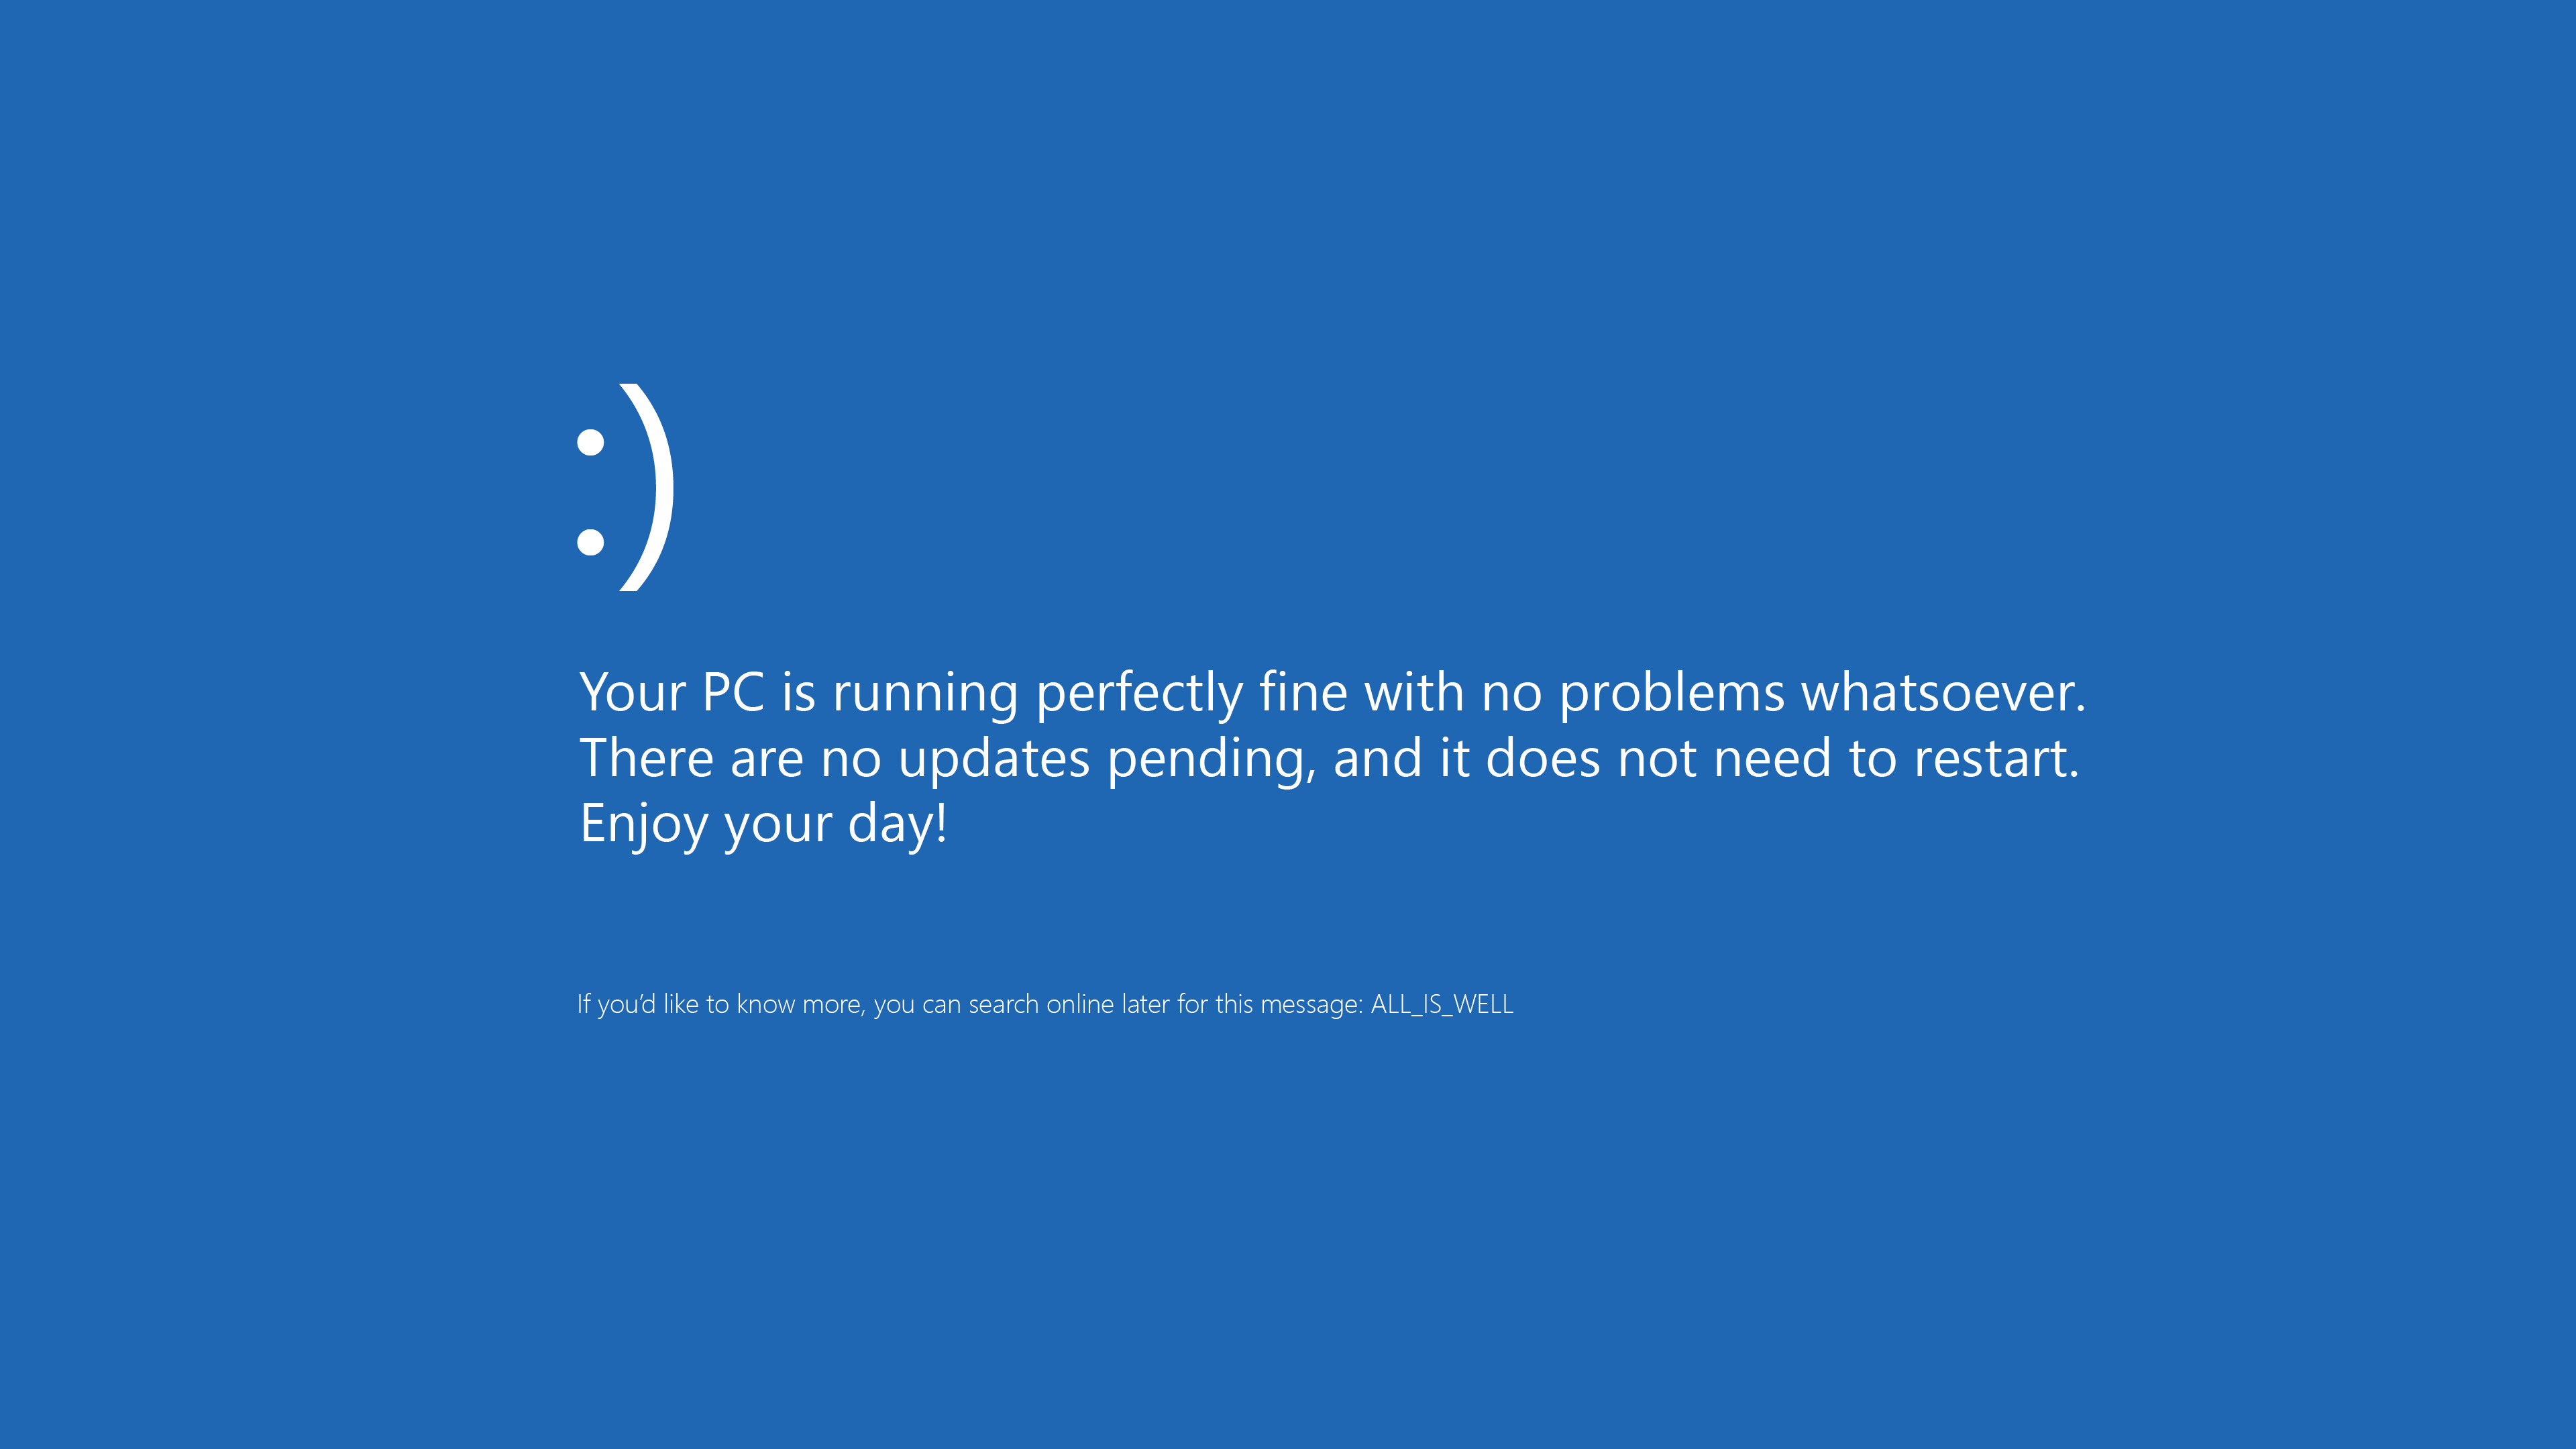 Windows 10 Blue Screen Of Death Warning Signs Blue Microsoft Text Humor 3840x2160